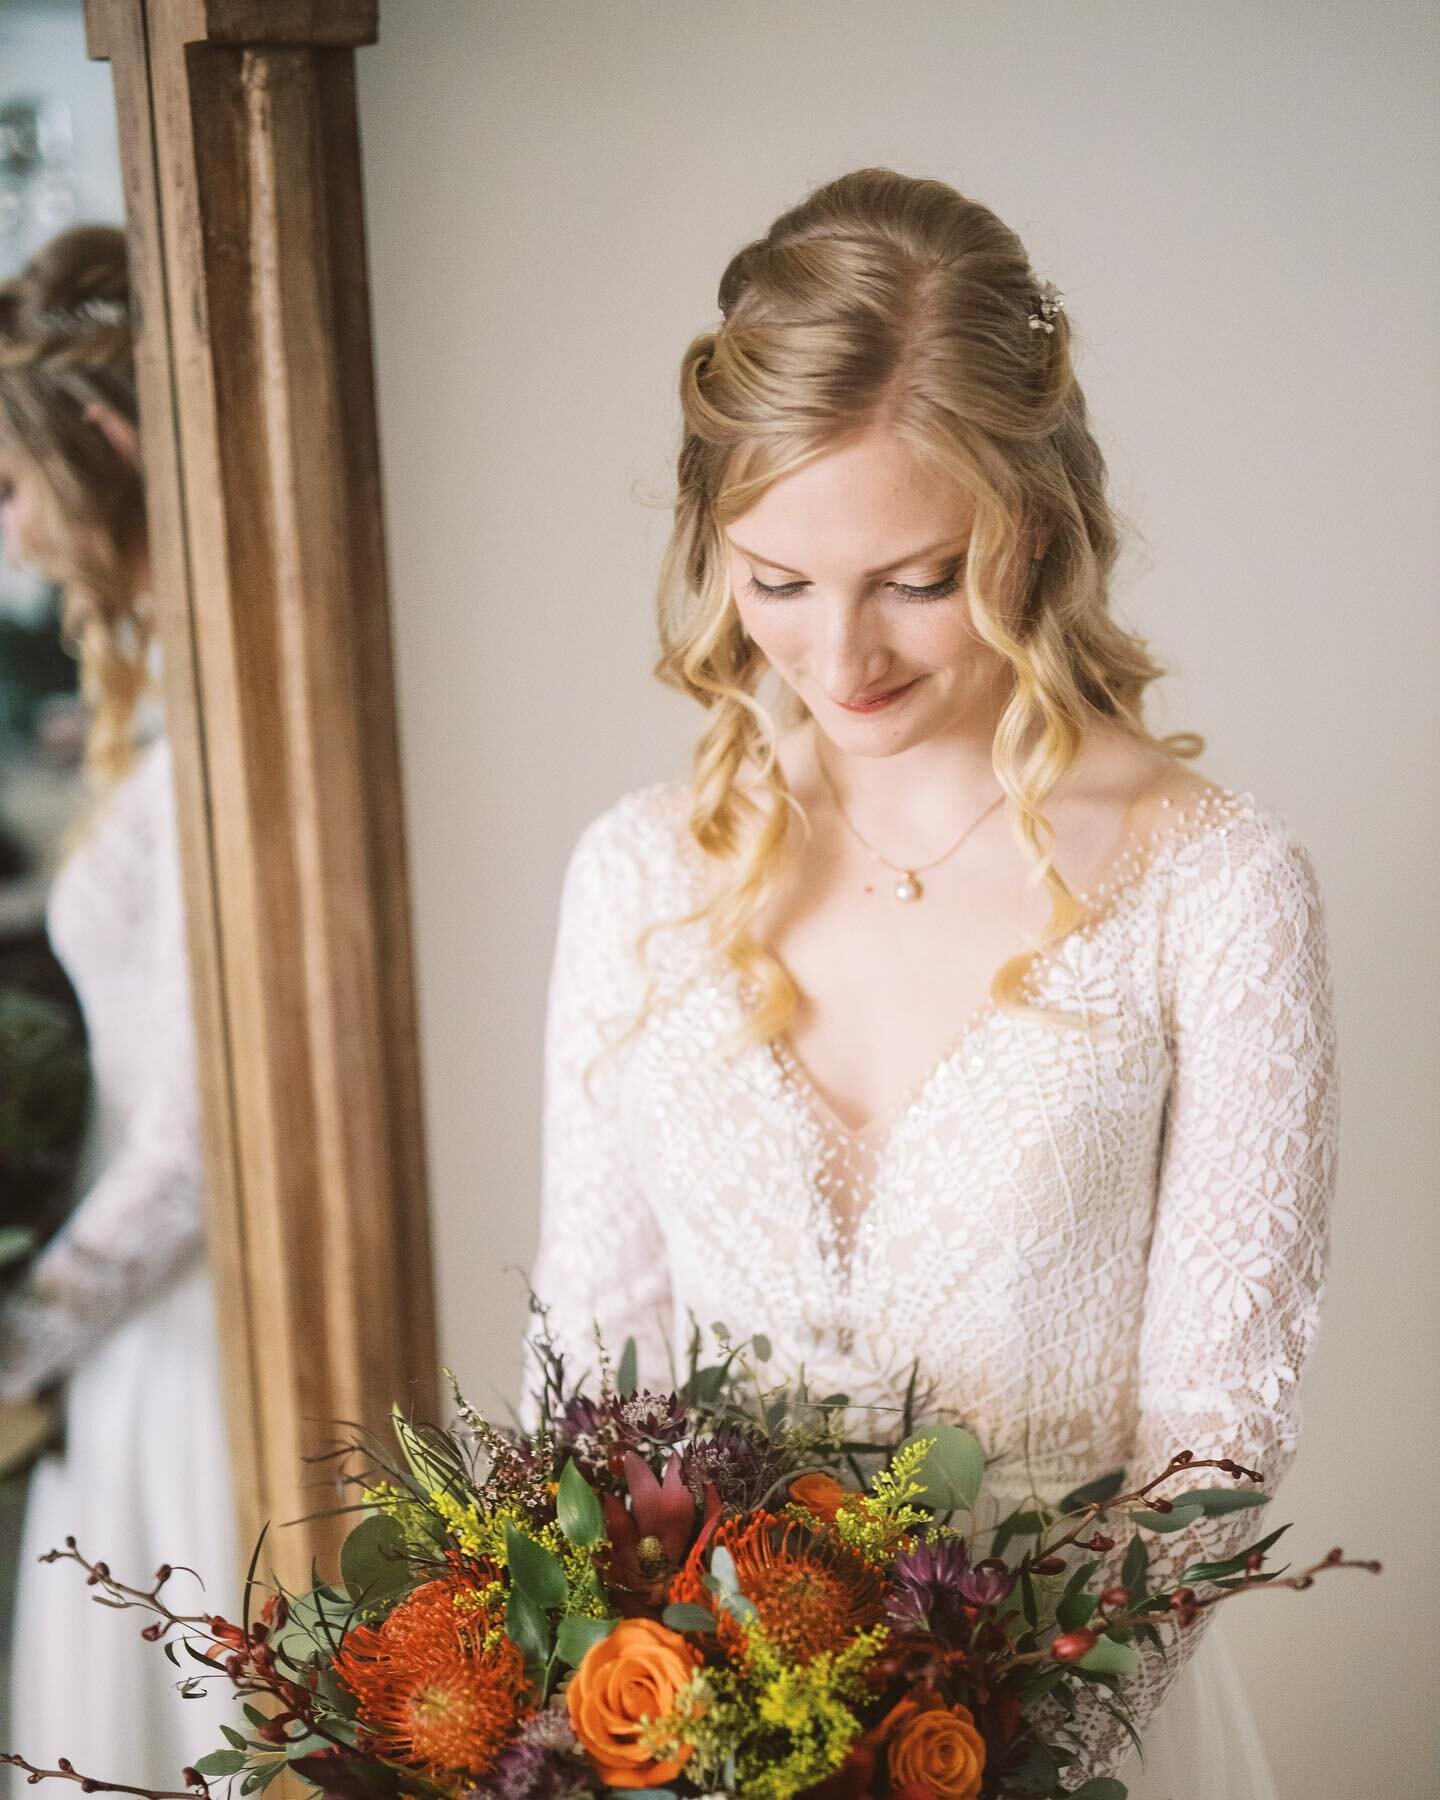 Beautiful real bride Georgia wore a long sleeve A-line wedding dress with cotton leaf lace and light hand beading at the neckline and illusion back, the chiffon skirt has delicate box pleats for an elegant detail. We love how she paired this dress wi